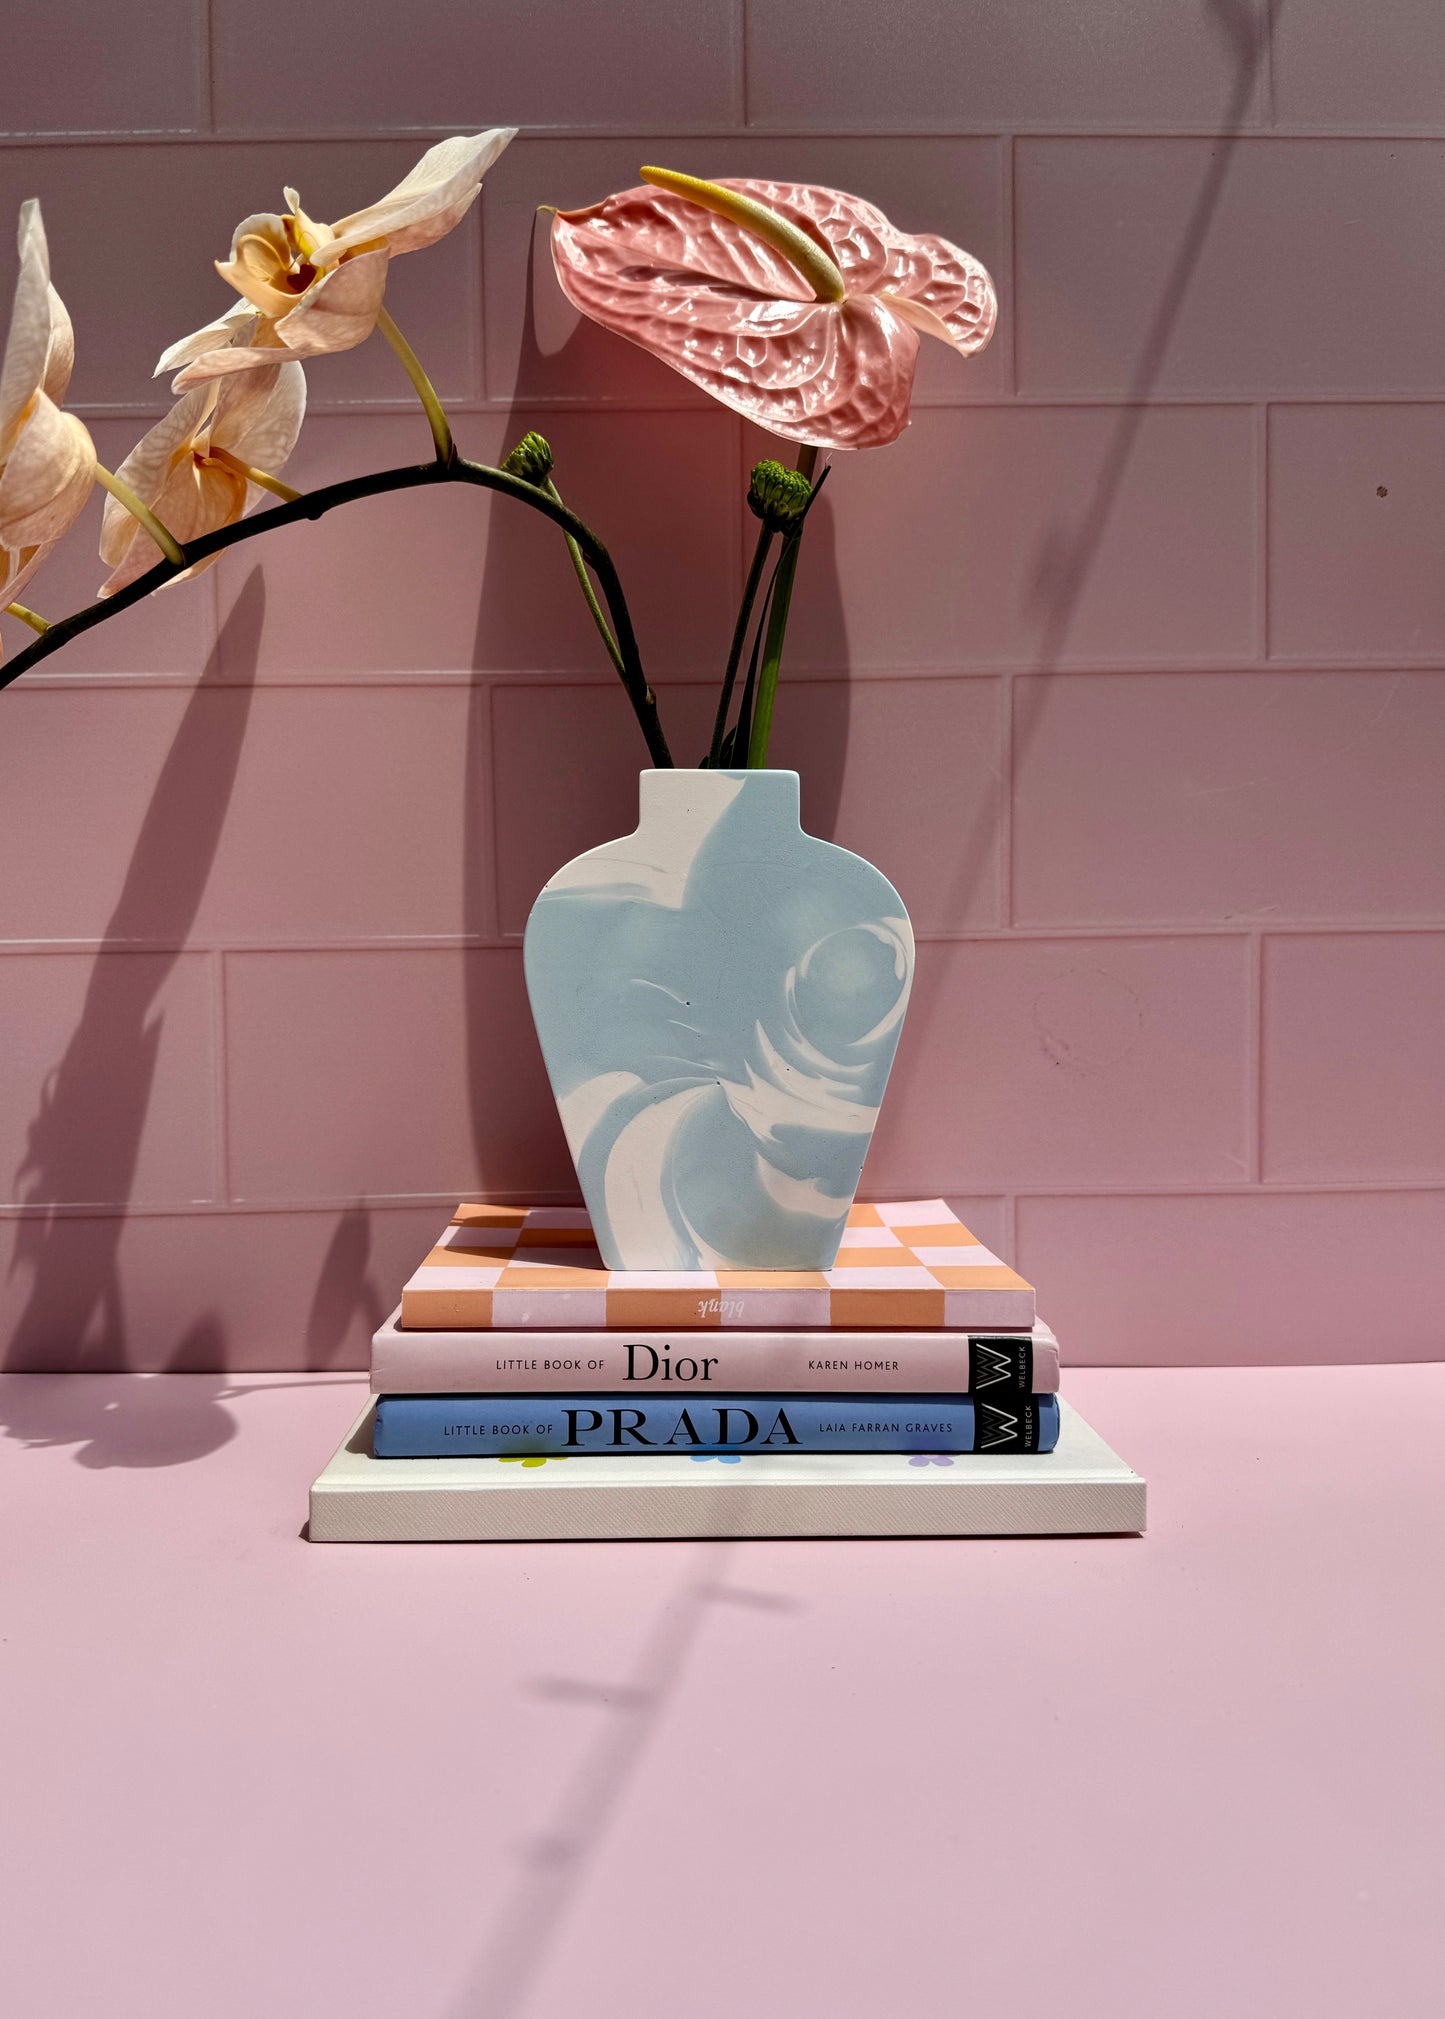 Smart Vase - Homewares that play their favourite song!